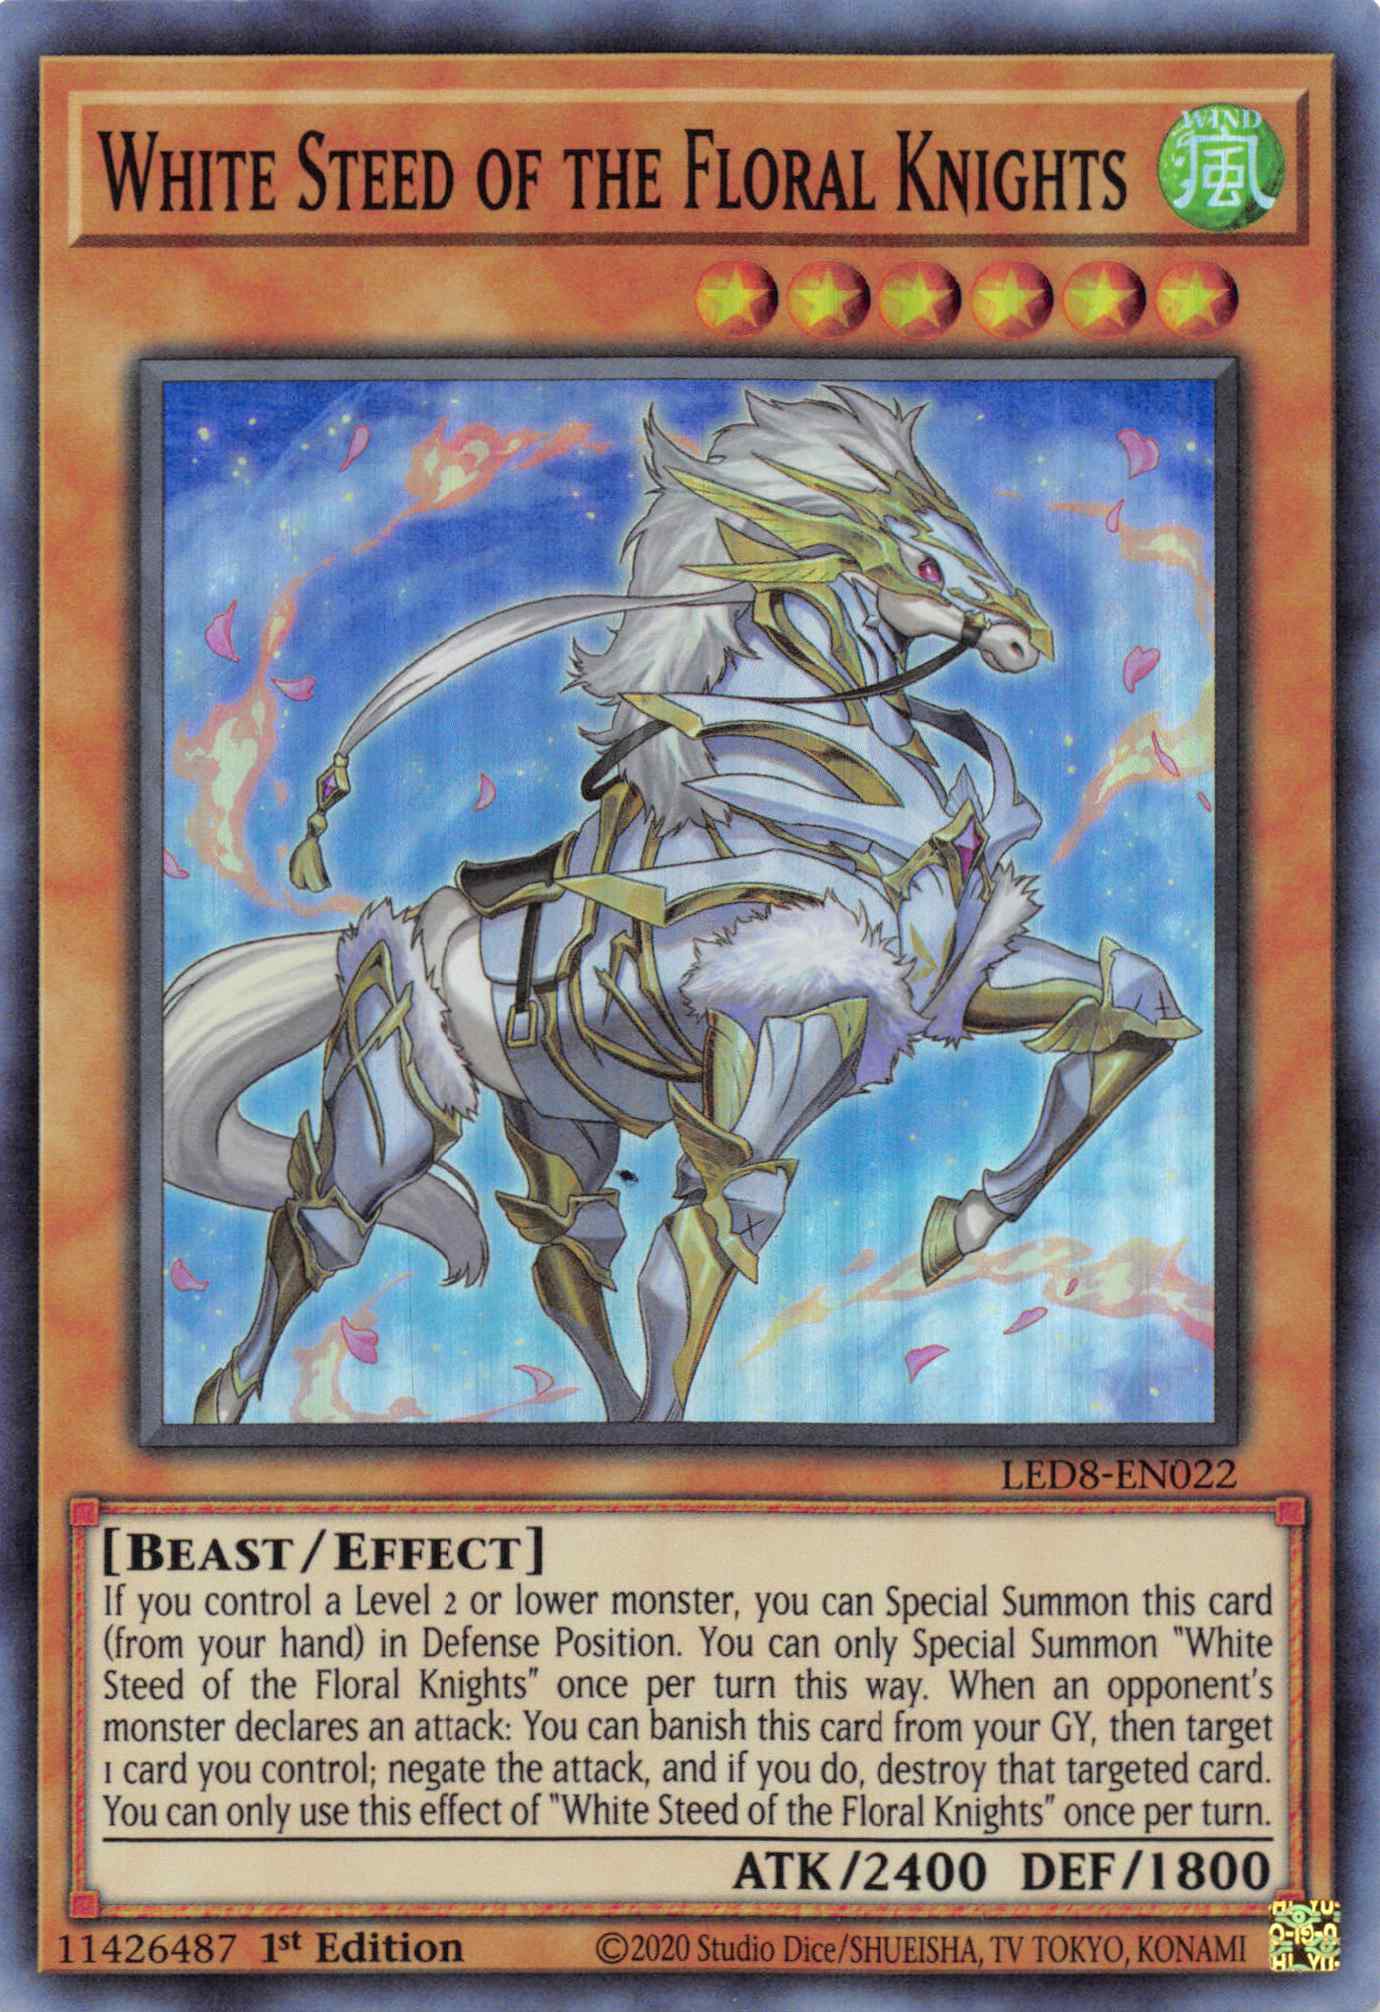 White Steed of the Floral Knights [LED8-EN022] Super Rare | Shuffle n Cut Hobbies & Games